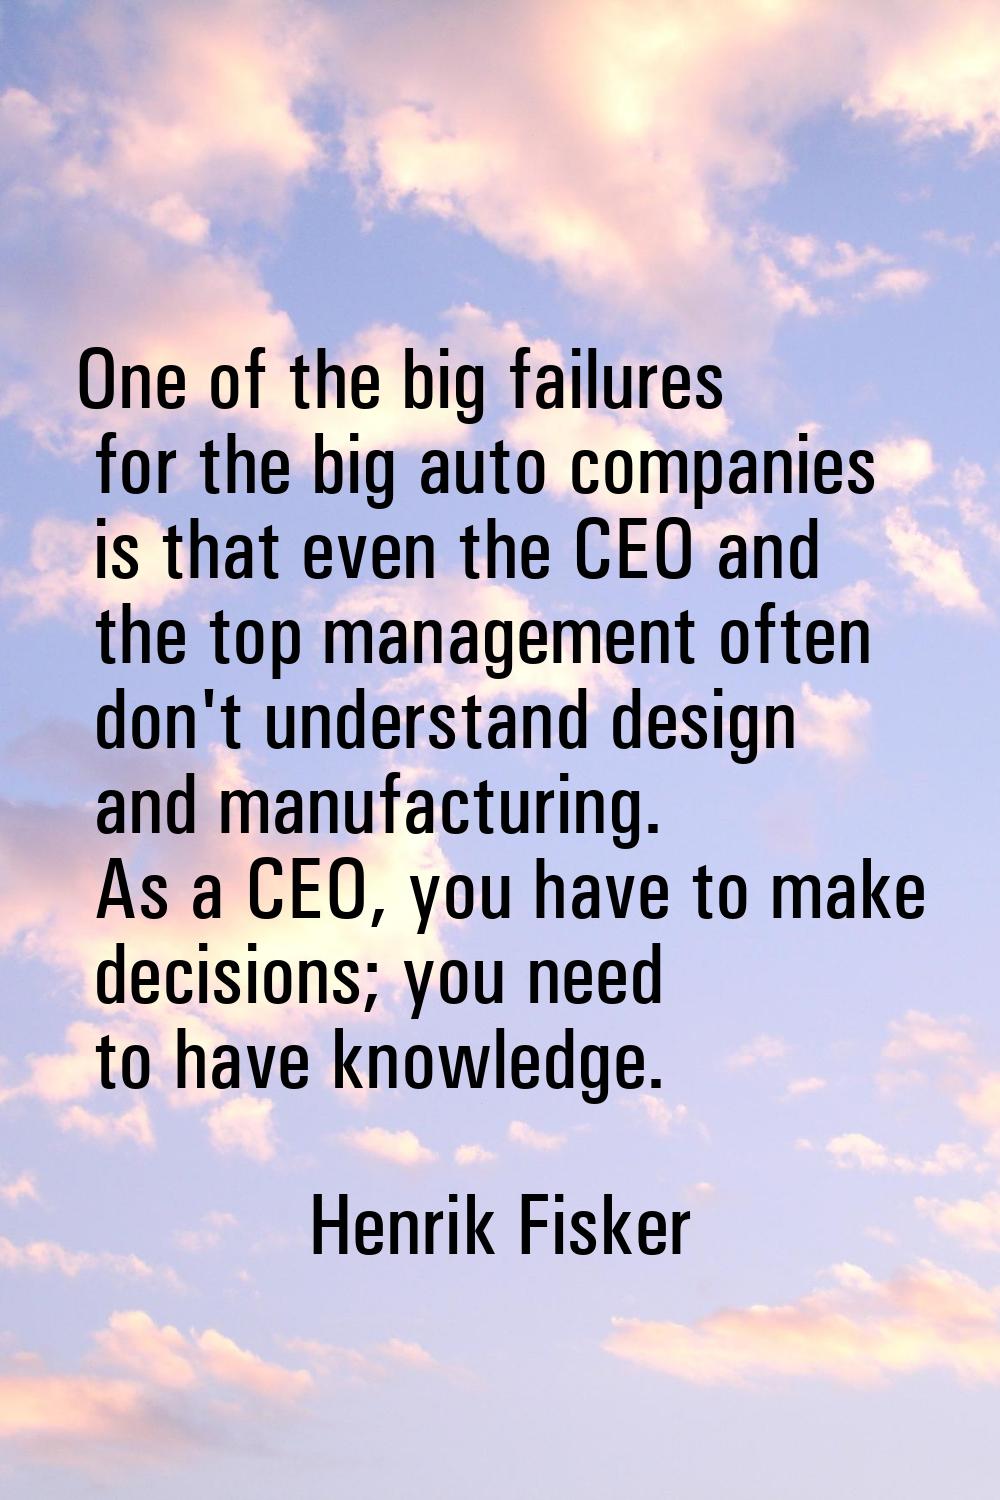 One of the big failures for the big auto companies is that even the CEO and the top management ofte